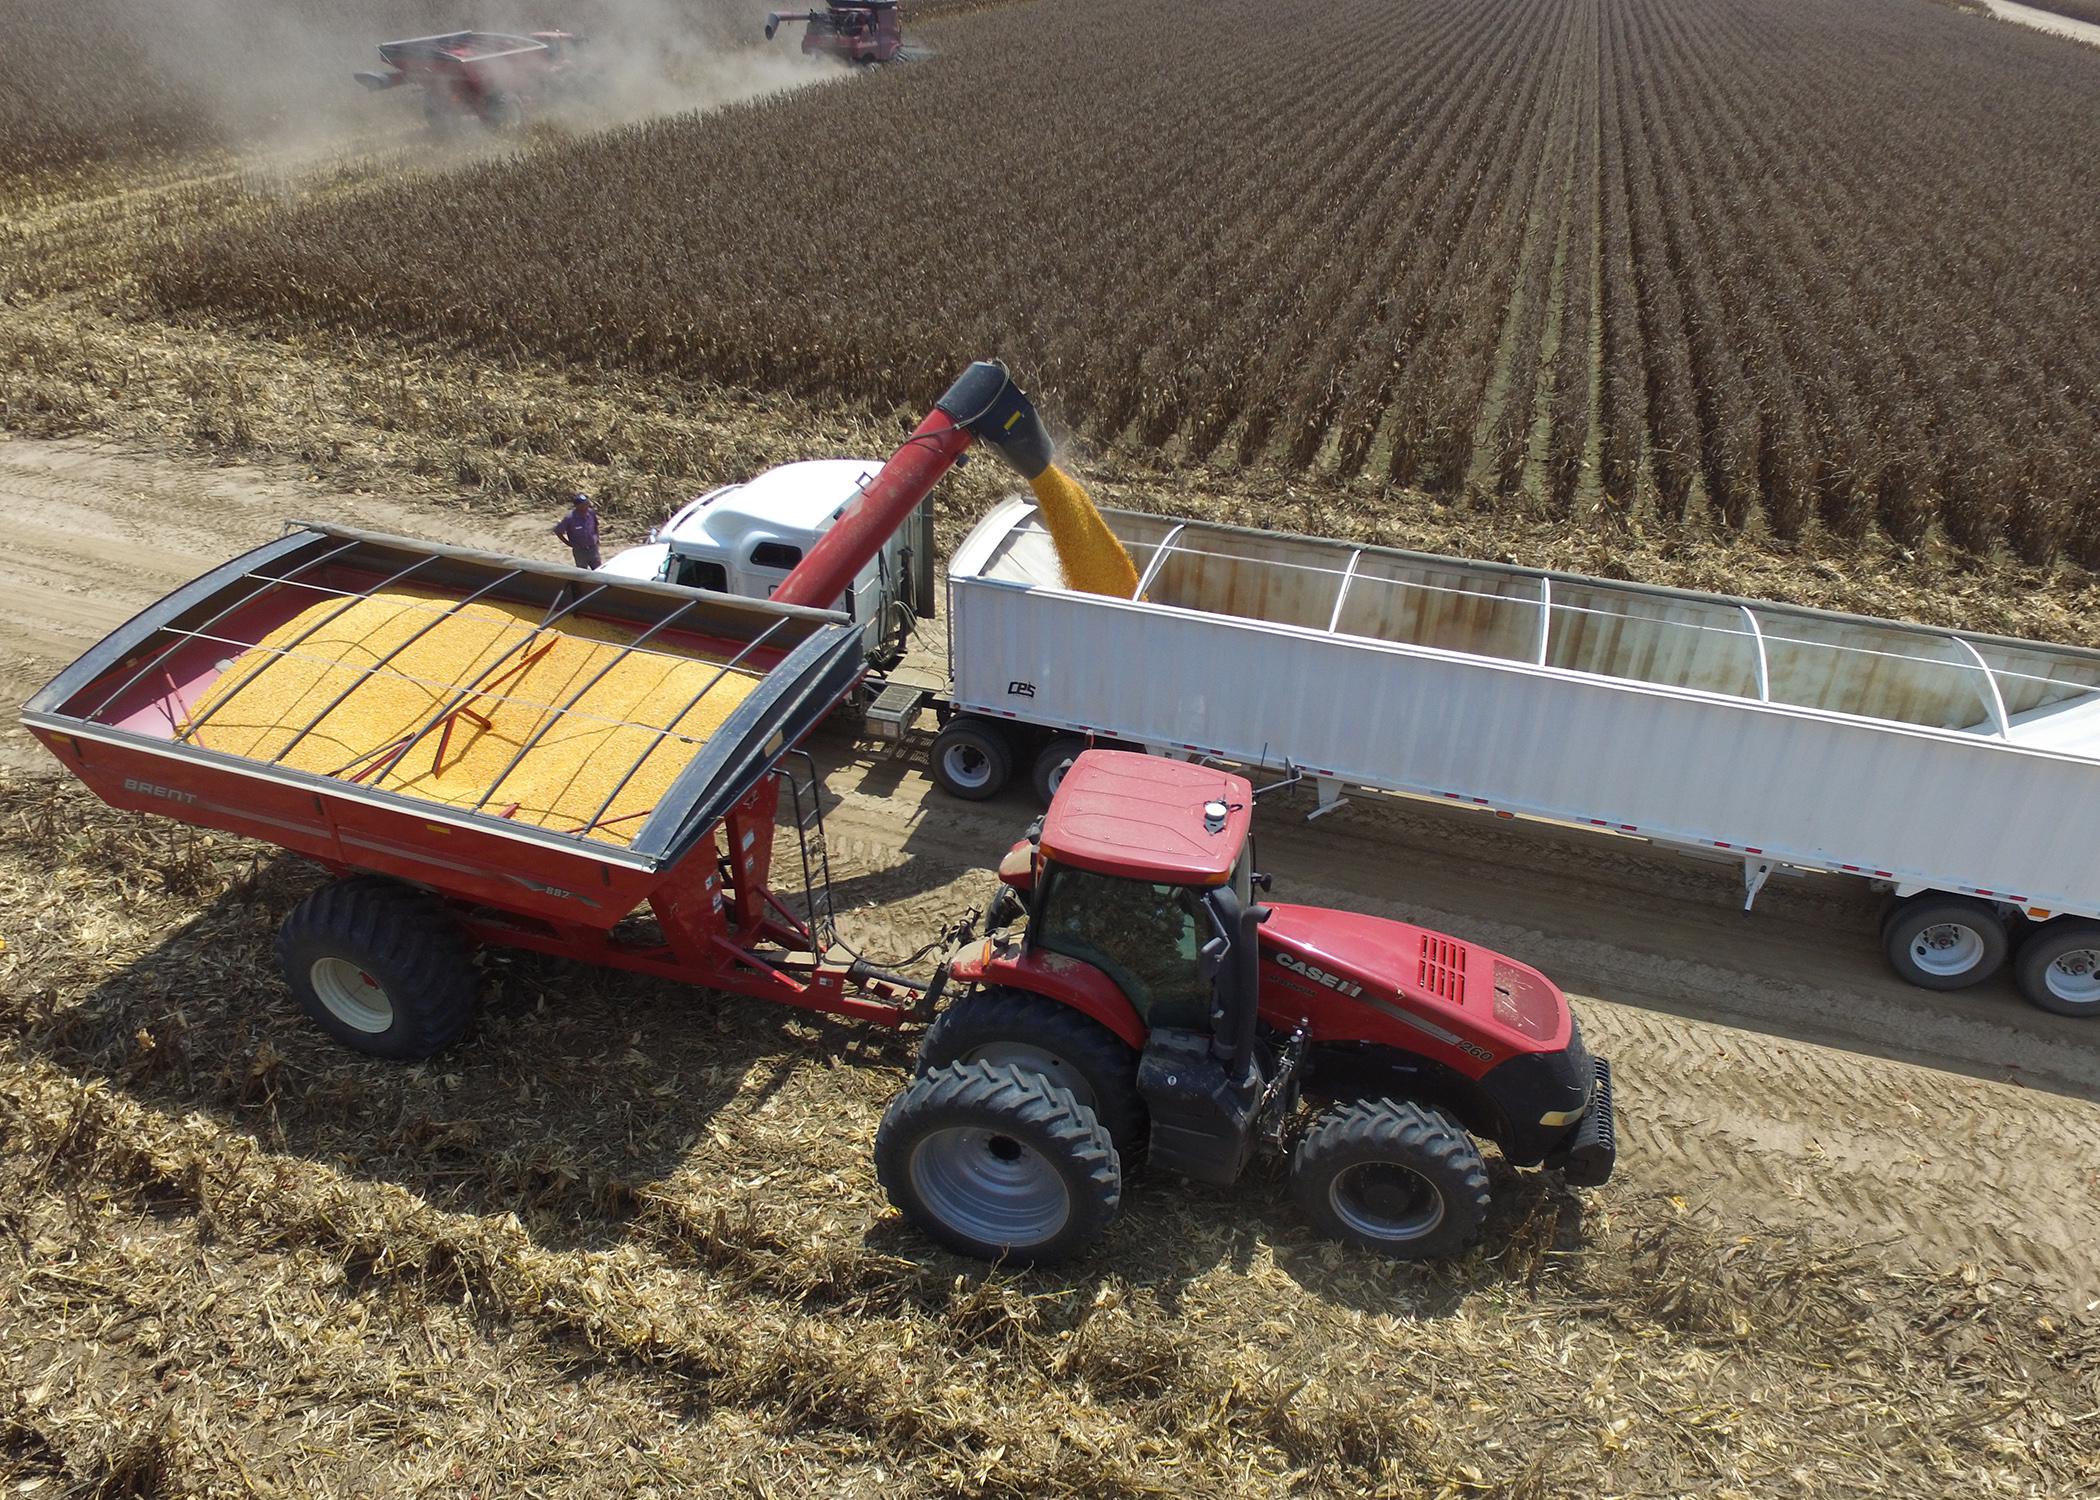 Aerial view of a tractor and a load of grain being transferred.